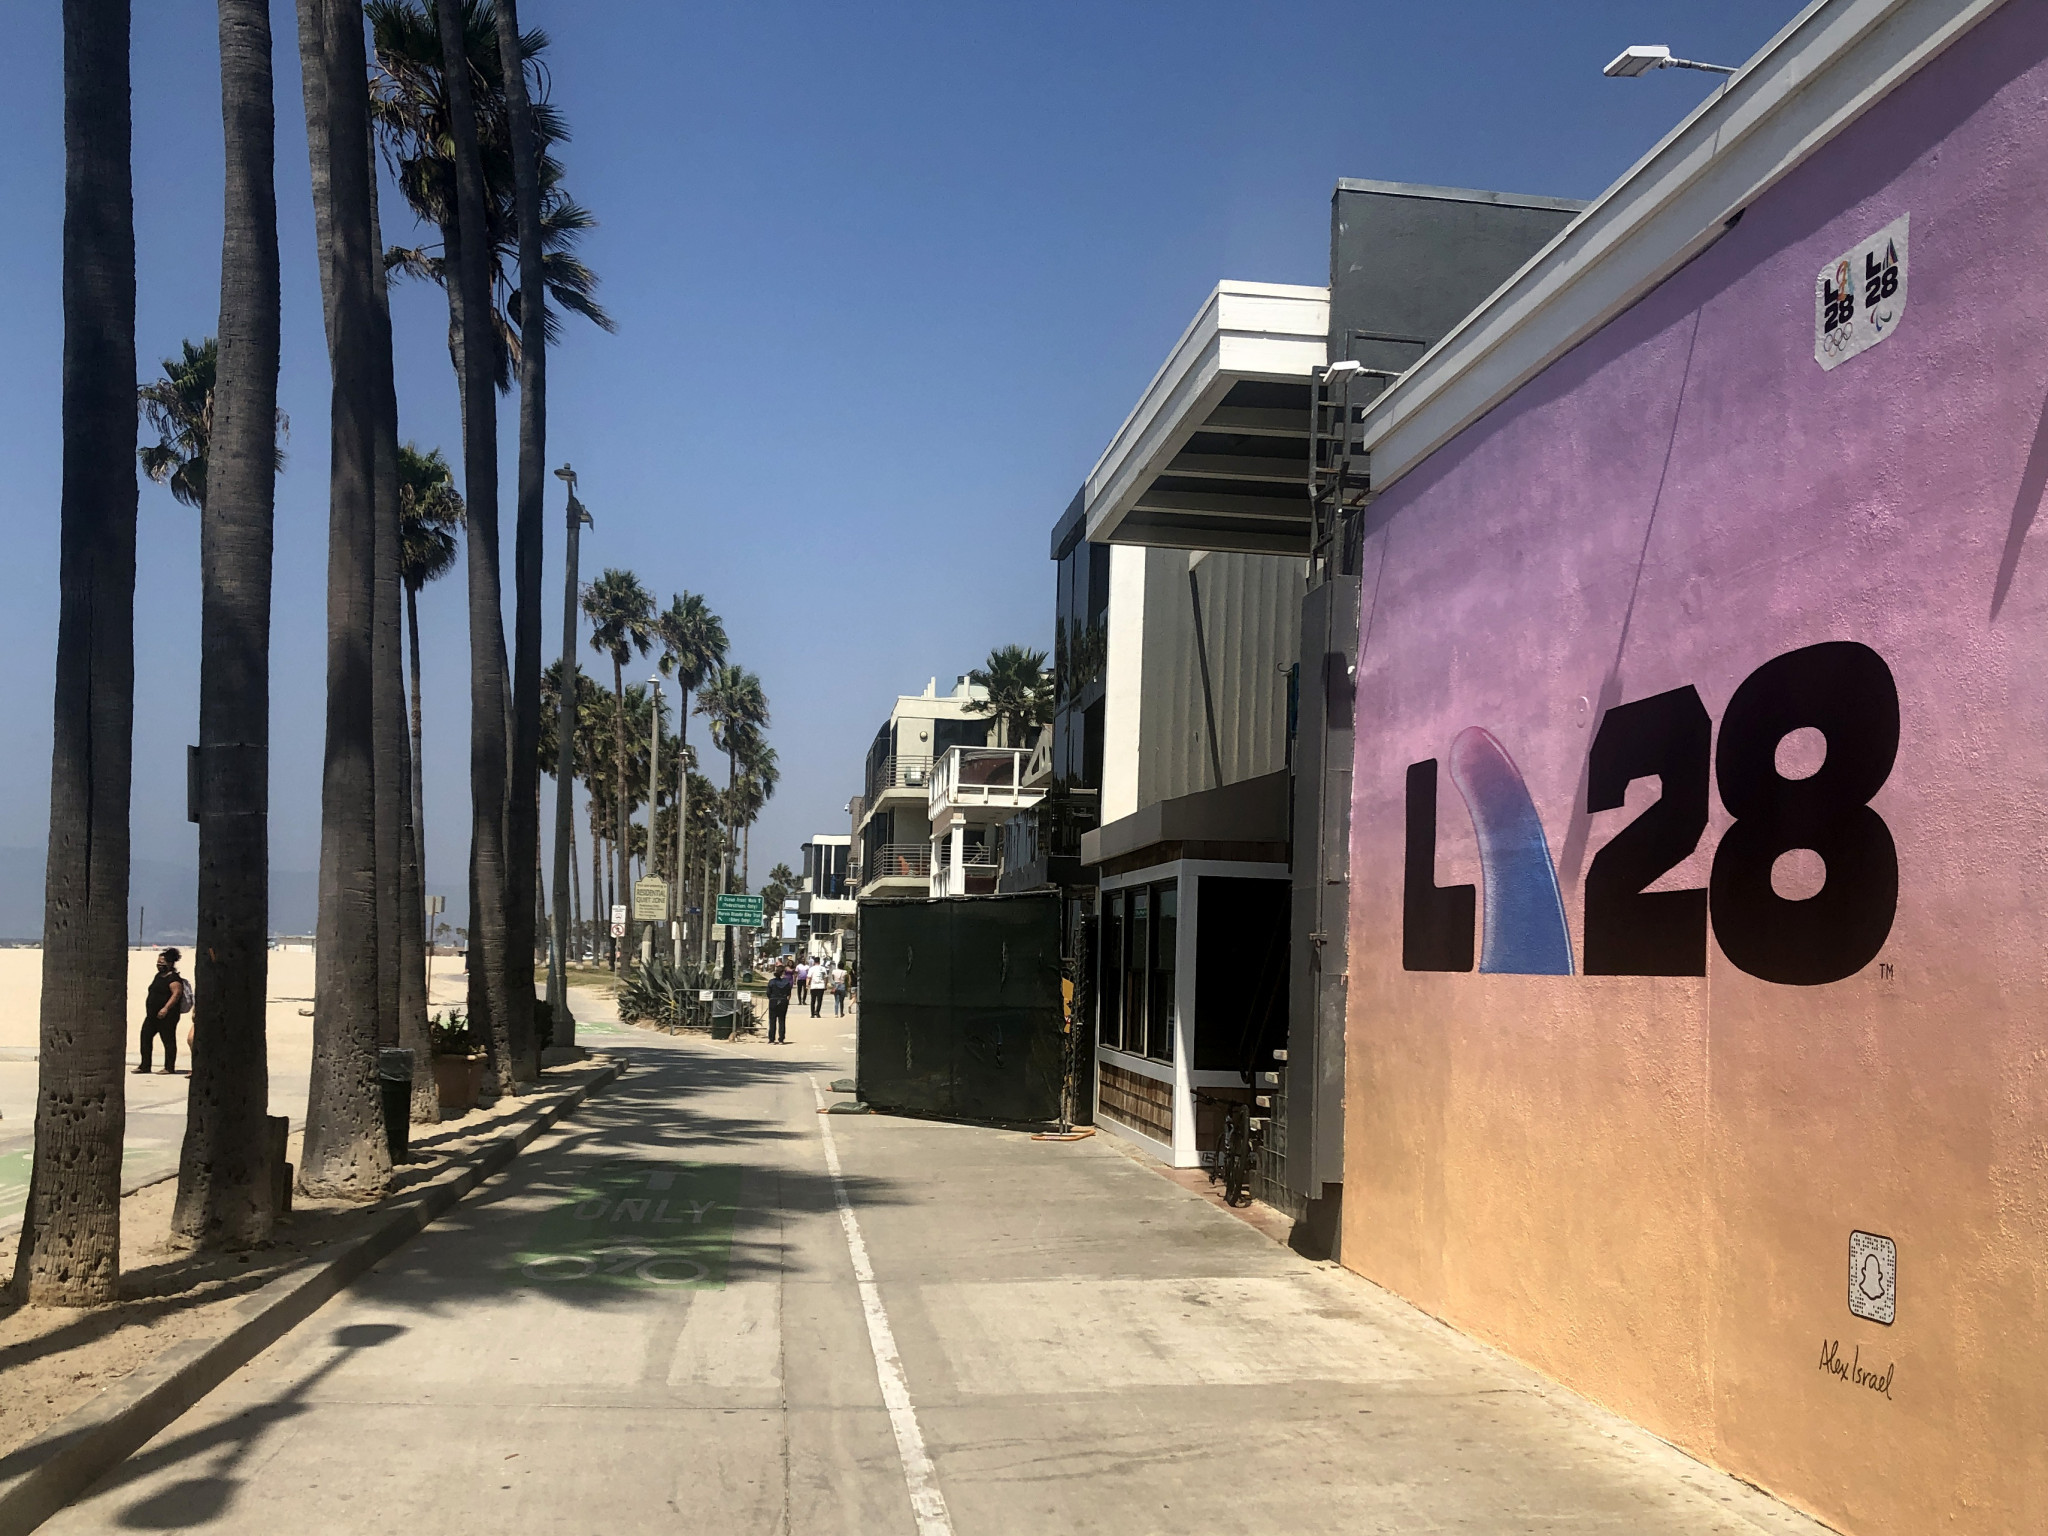 Climbing and surfing still considered for Los Angeles 2028 Paralympics